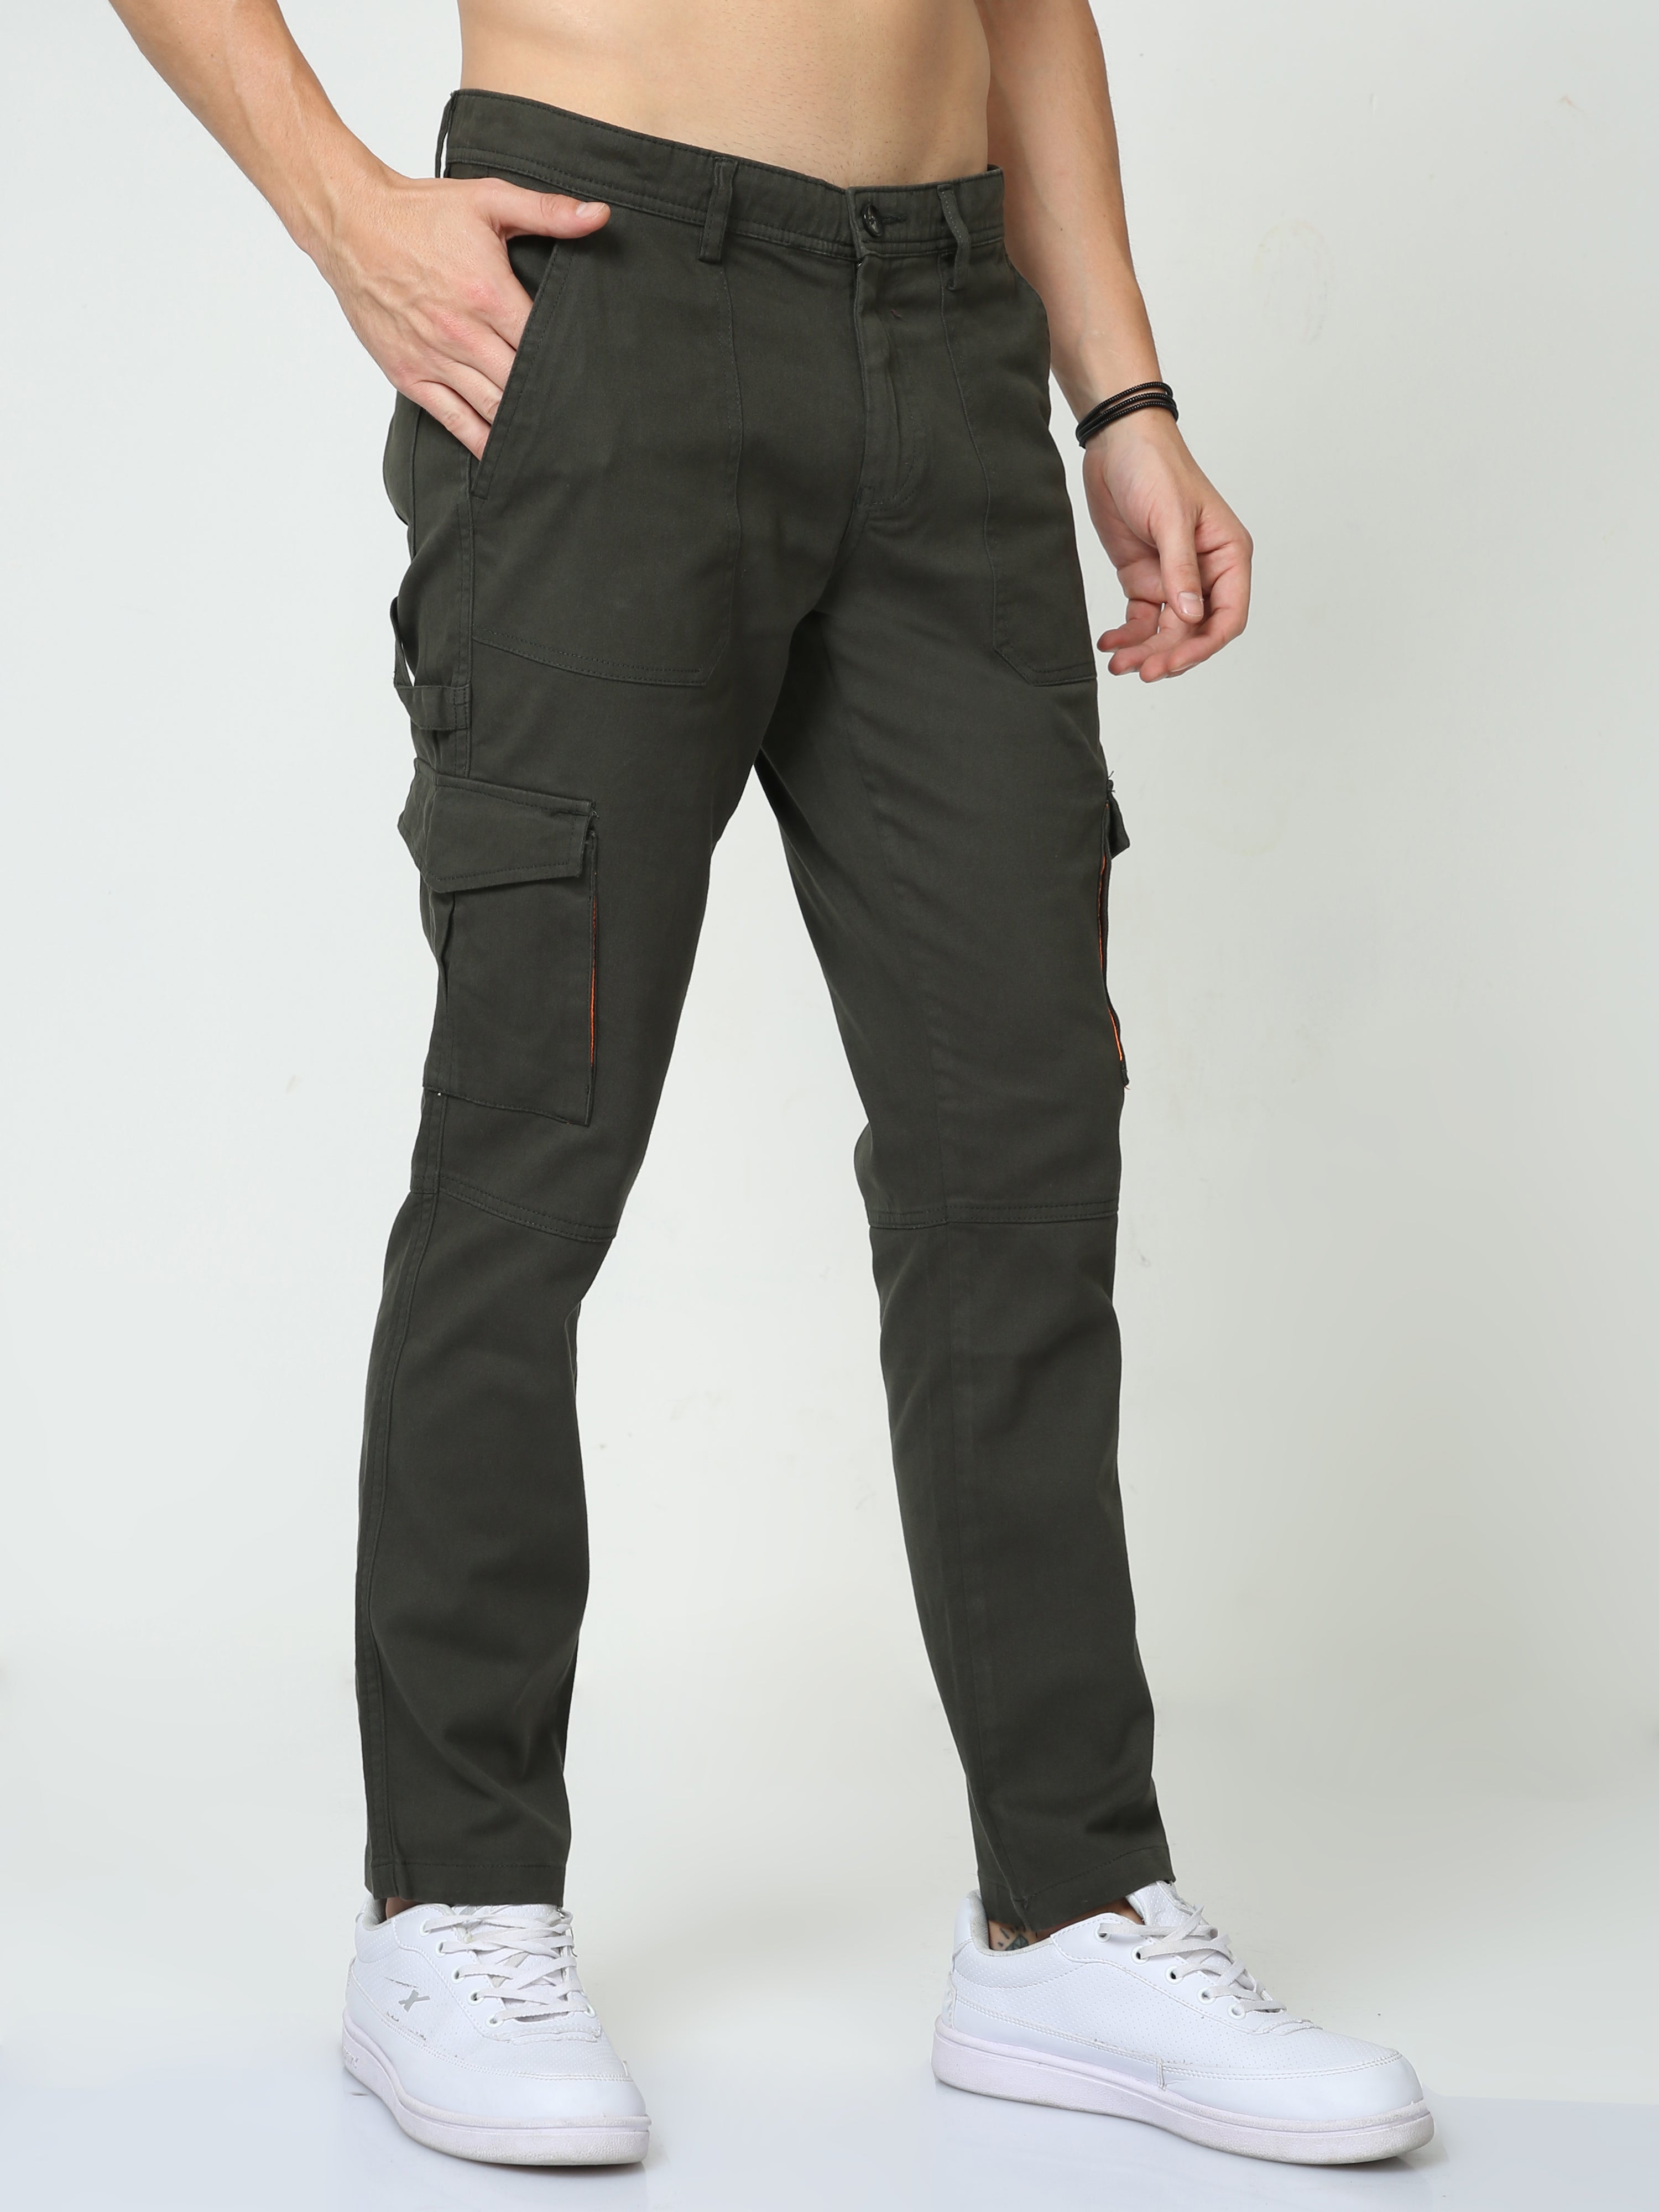 Men Olive 100% Cotton Tactical Pant Camping Hiking Army Cargo Combat  Military Trouser -